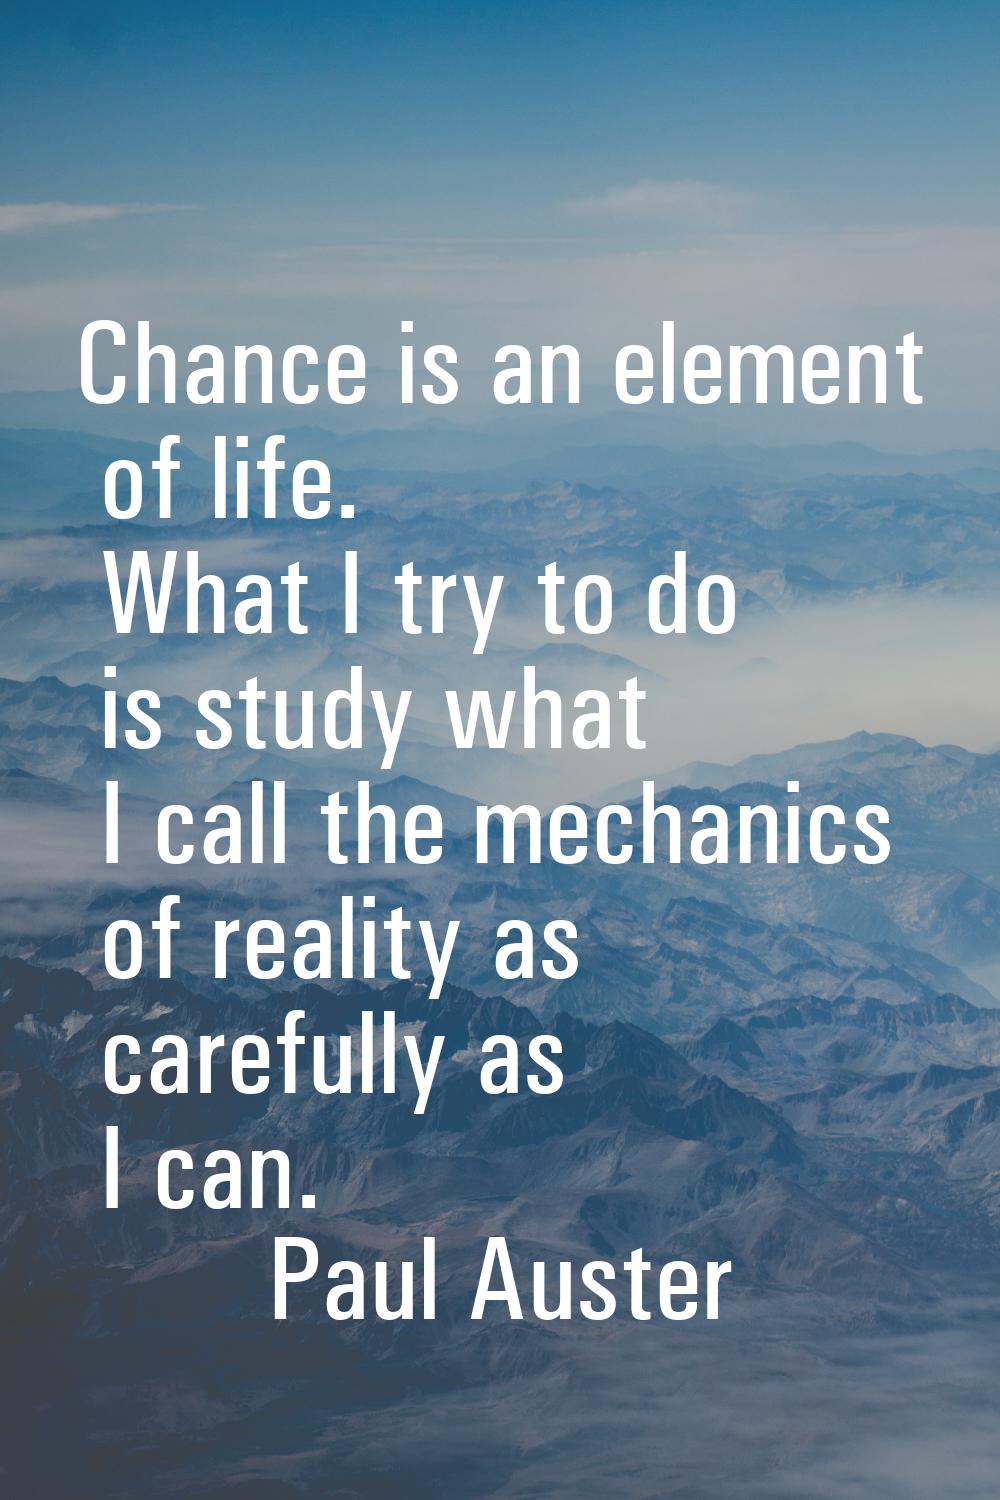 Chance is an element of life. What I try to do is study what I call the mechanics of reality as car